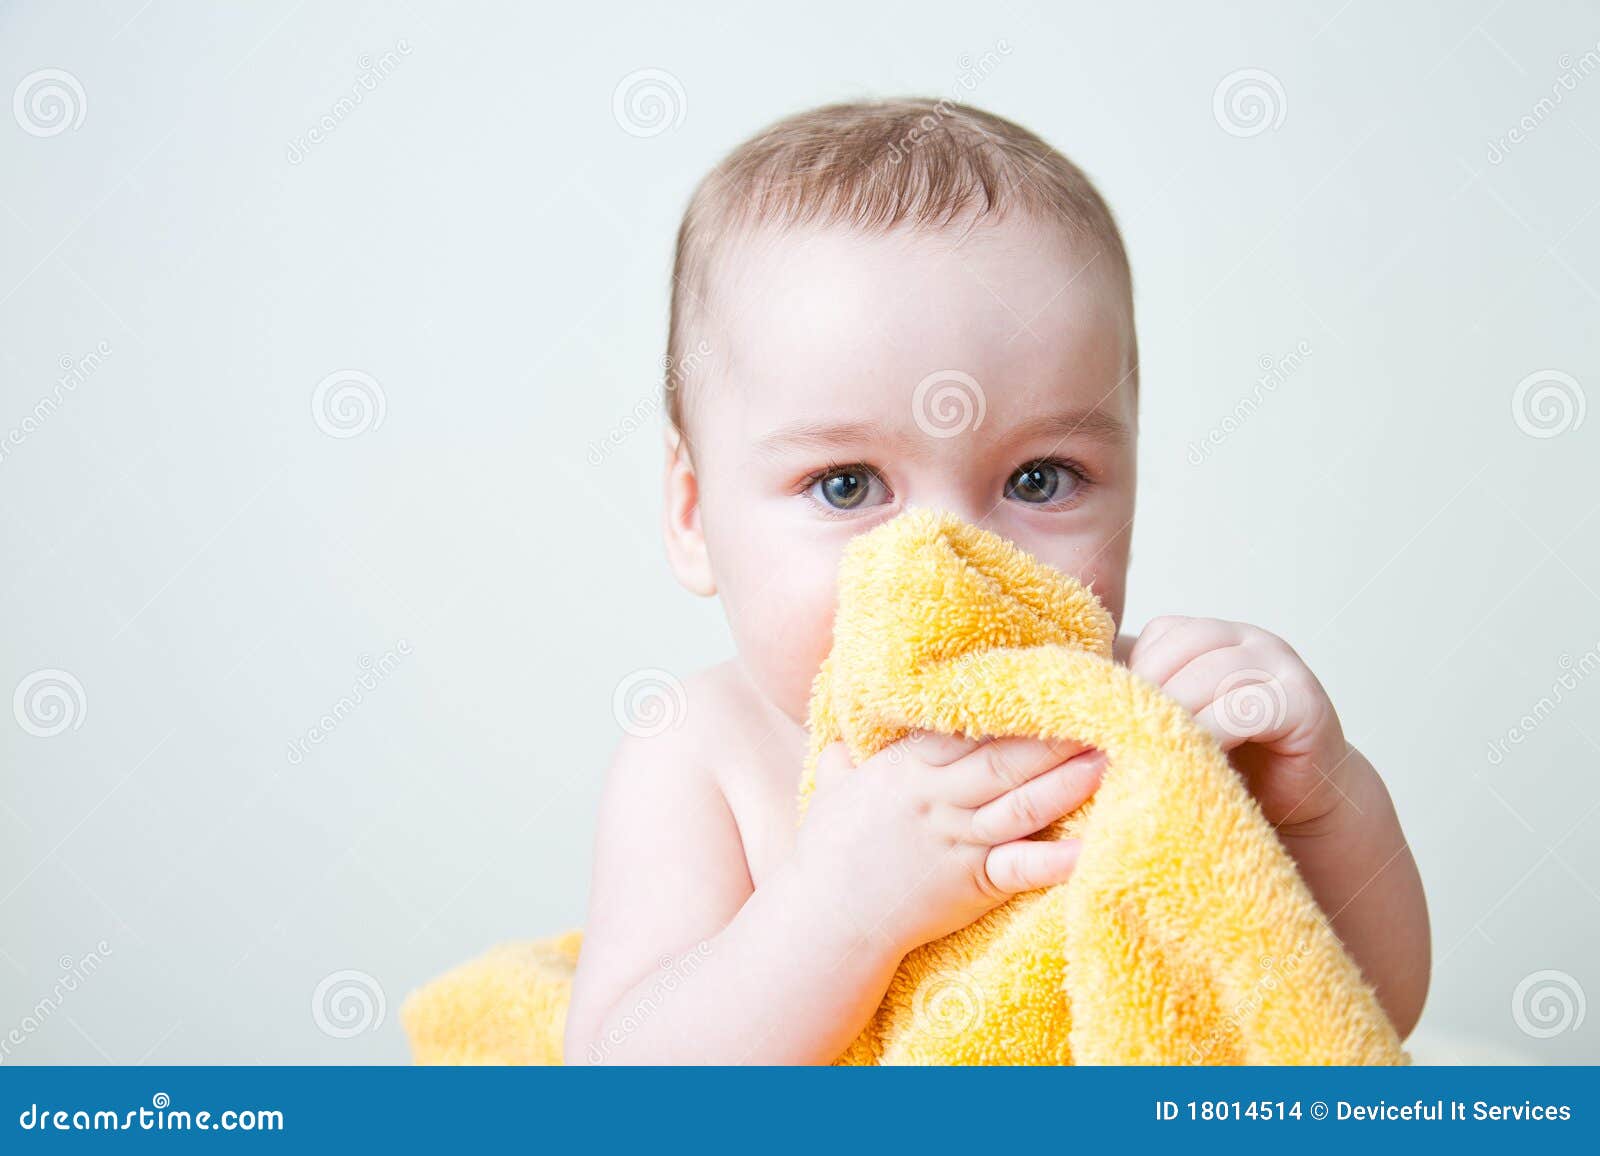 Baby After Bath Hiding Behind Yellow Towel Stock Images 